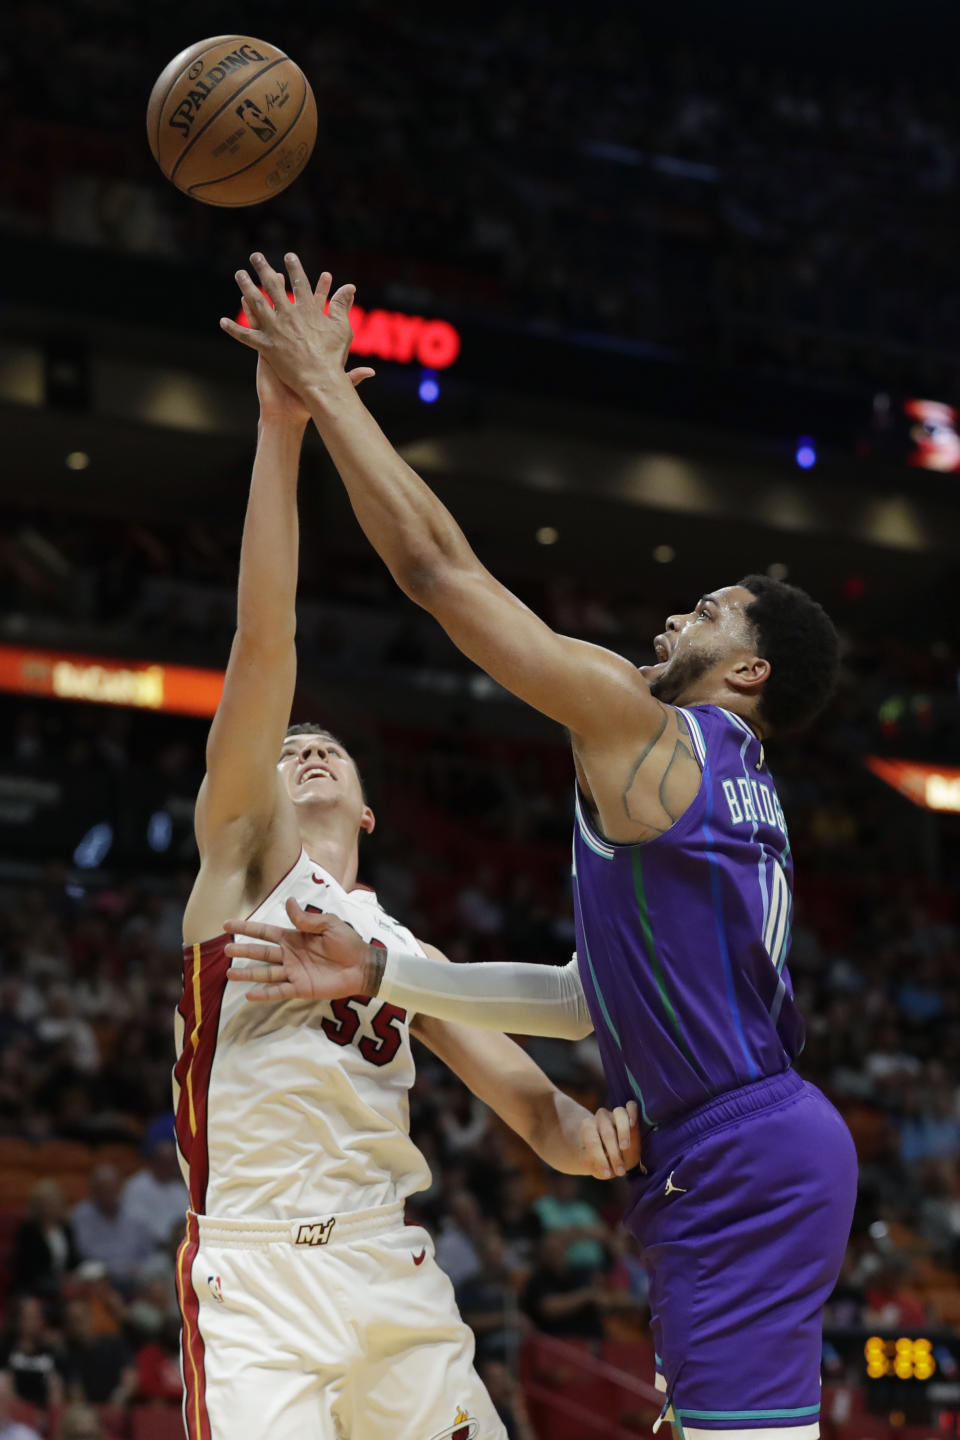 Charlotte Hornets forward Miles Bridges, right, goes up for a shot against Miami Heat forward Duncan Robinson (55) during the first half of an NBA basketball game, Wednesday, March 11, 2020, in Miami. (AP Photo/Wilfredo Lee)